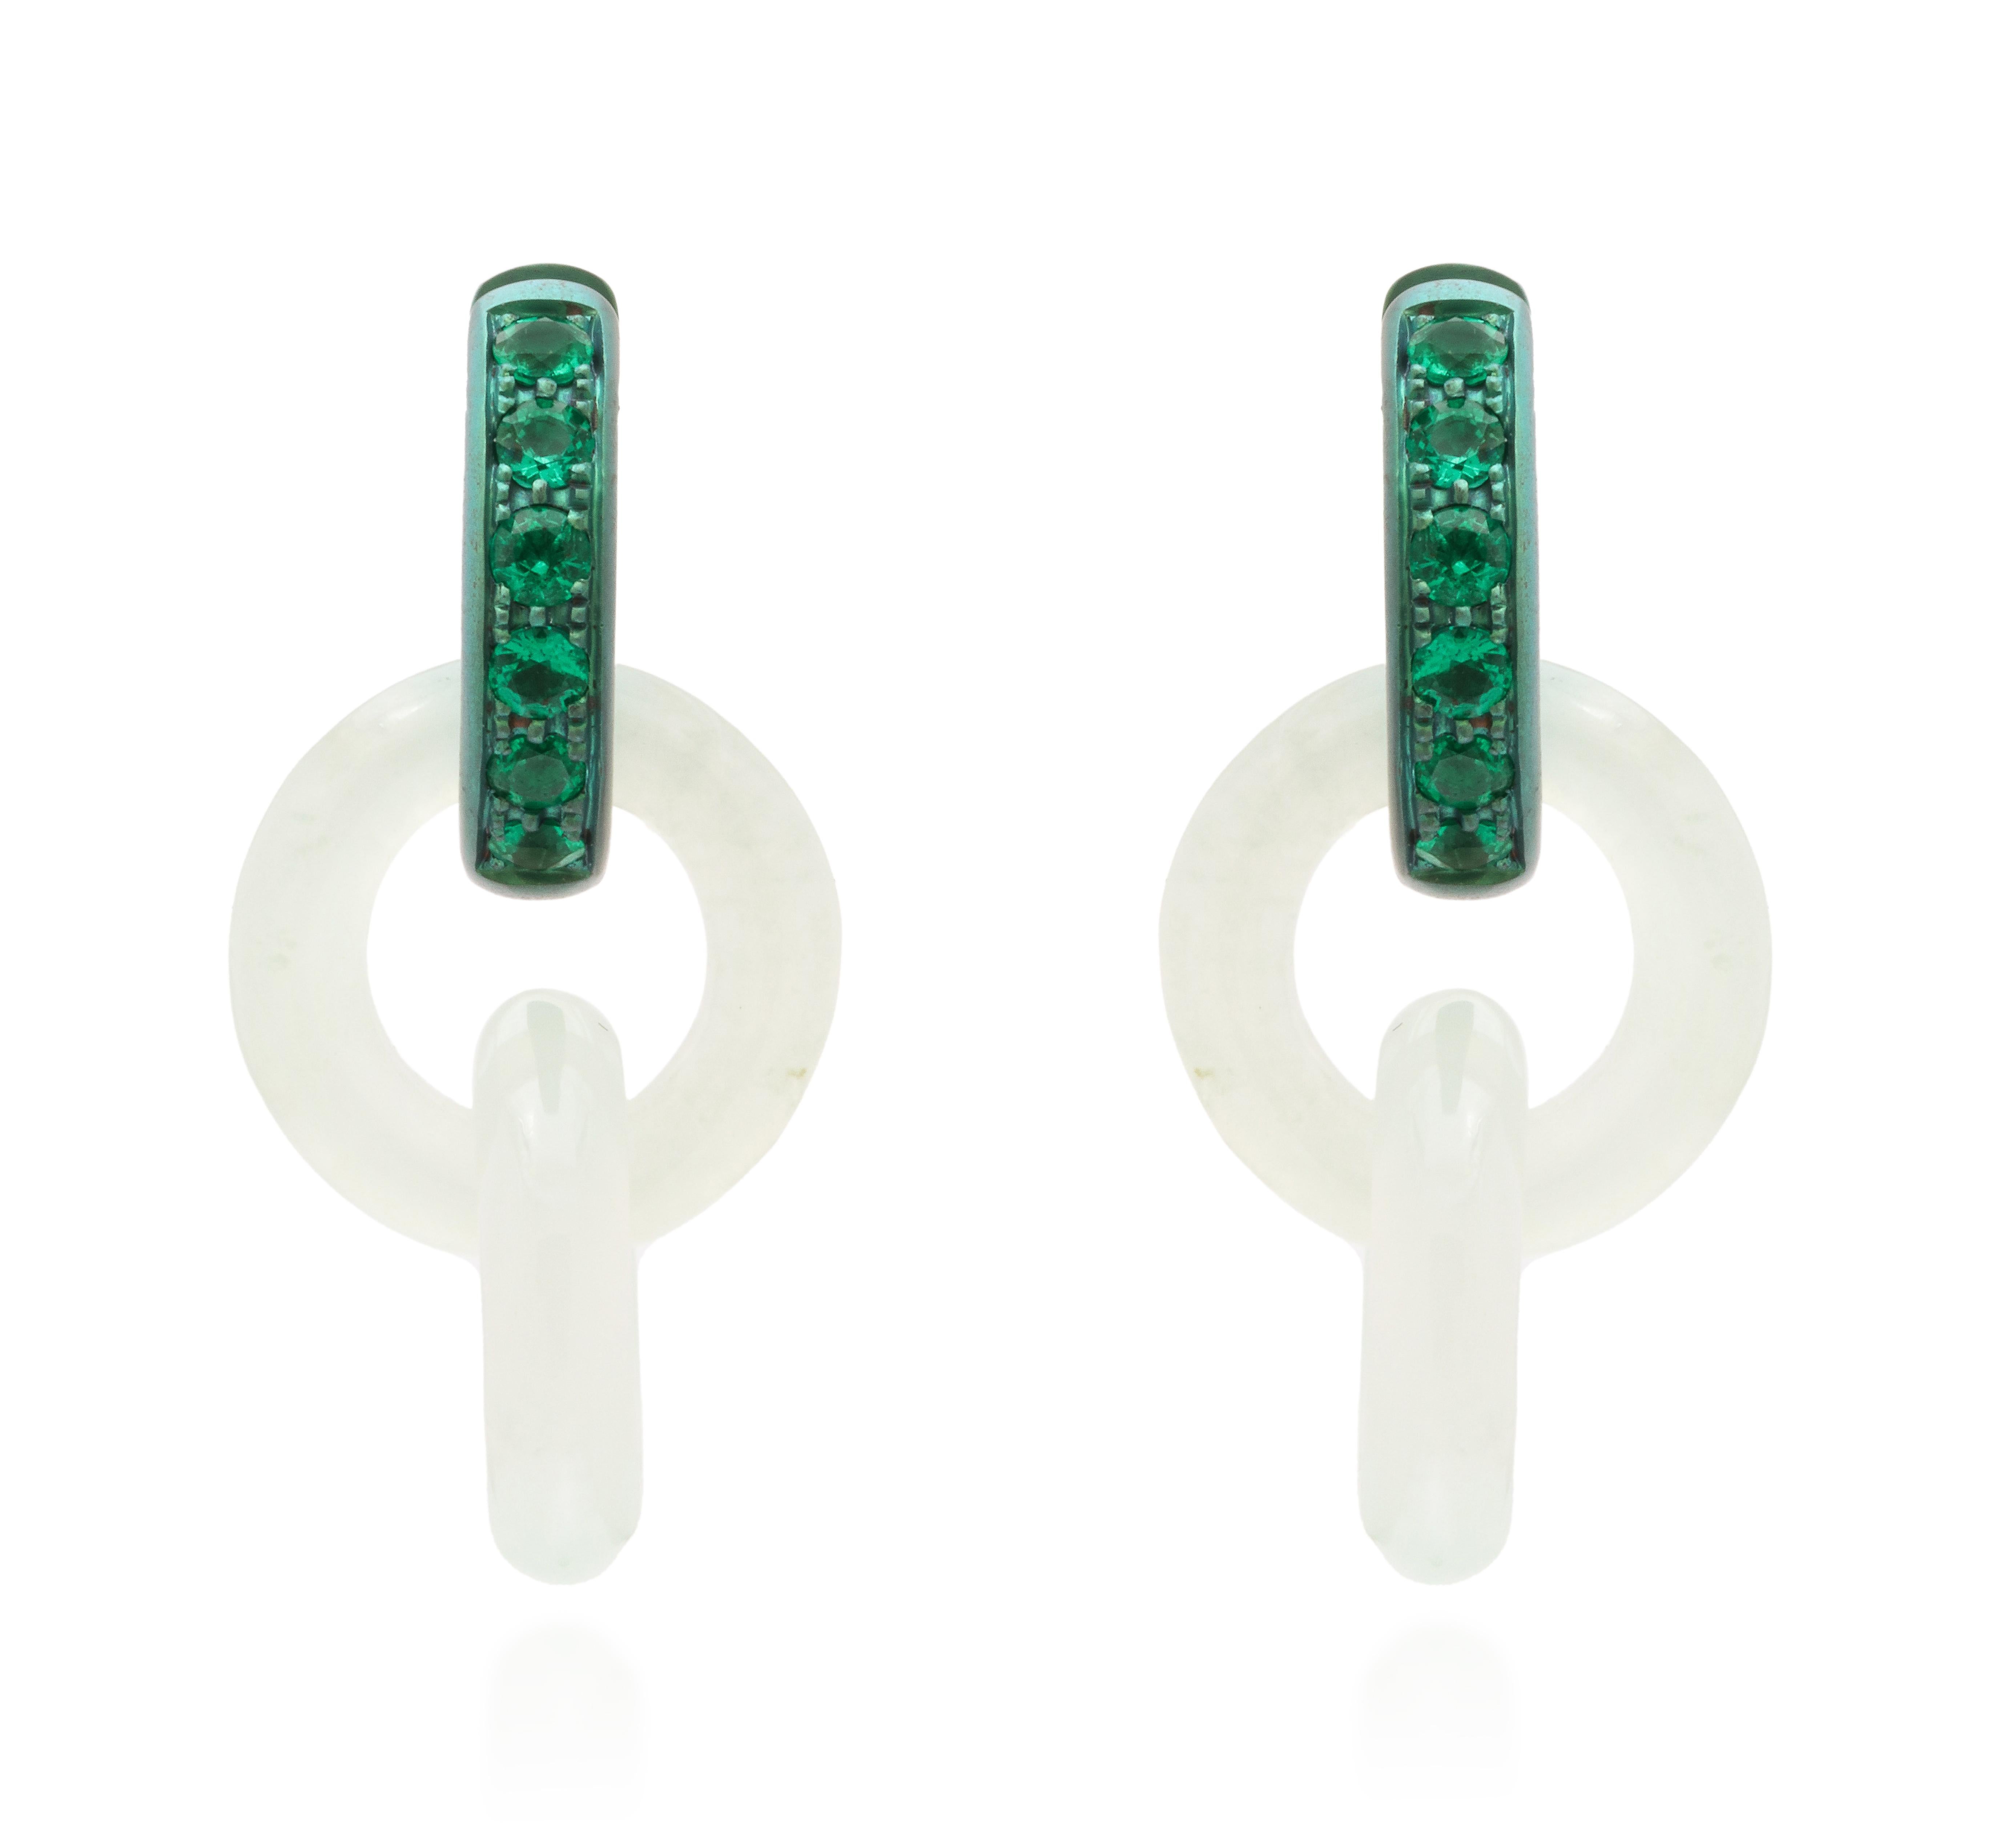 These exquisite jade hoops, meticulously hand-carved from a single block of jade, exemplify the unparalleled craftsmanship of stone carving. At once elegant and rare, the complexity of the interlocked design showcases the true mastery of the